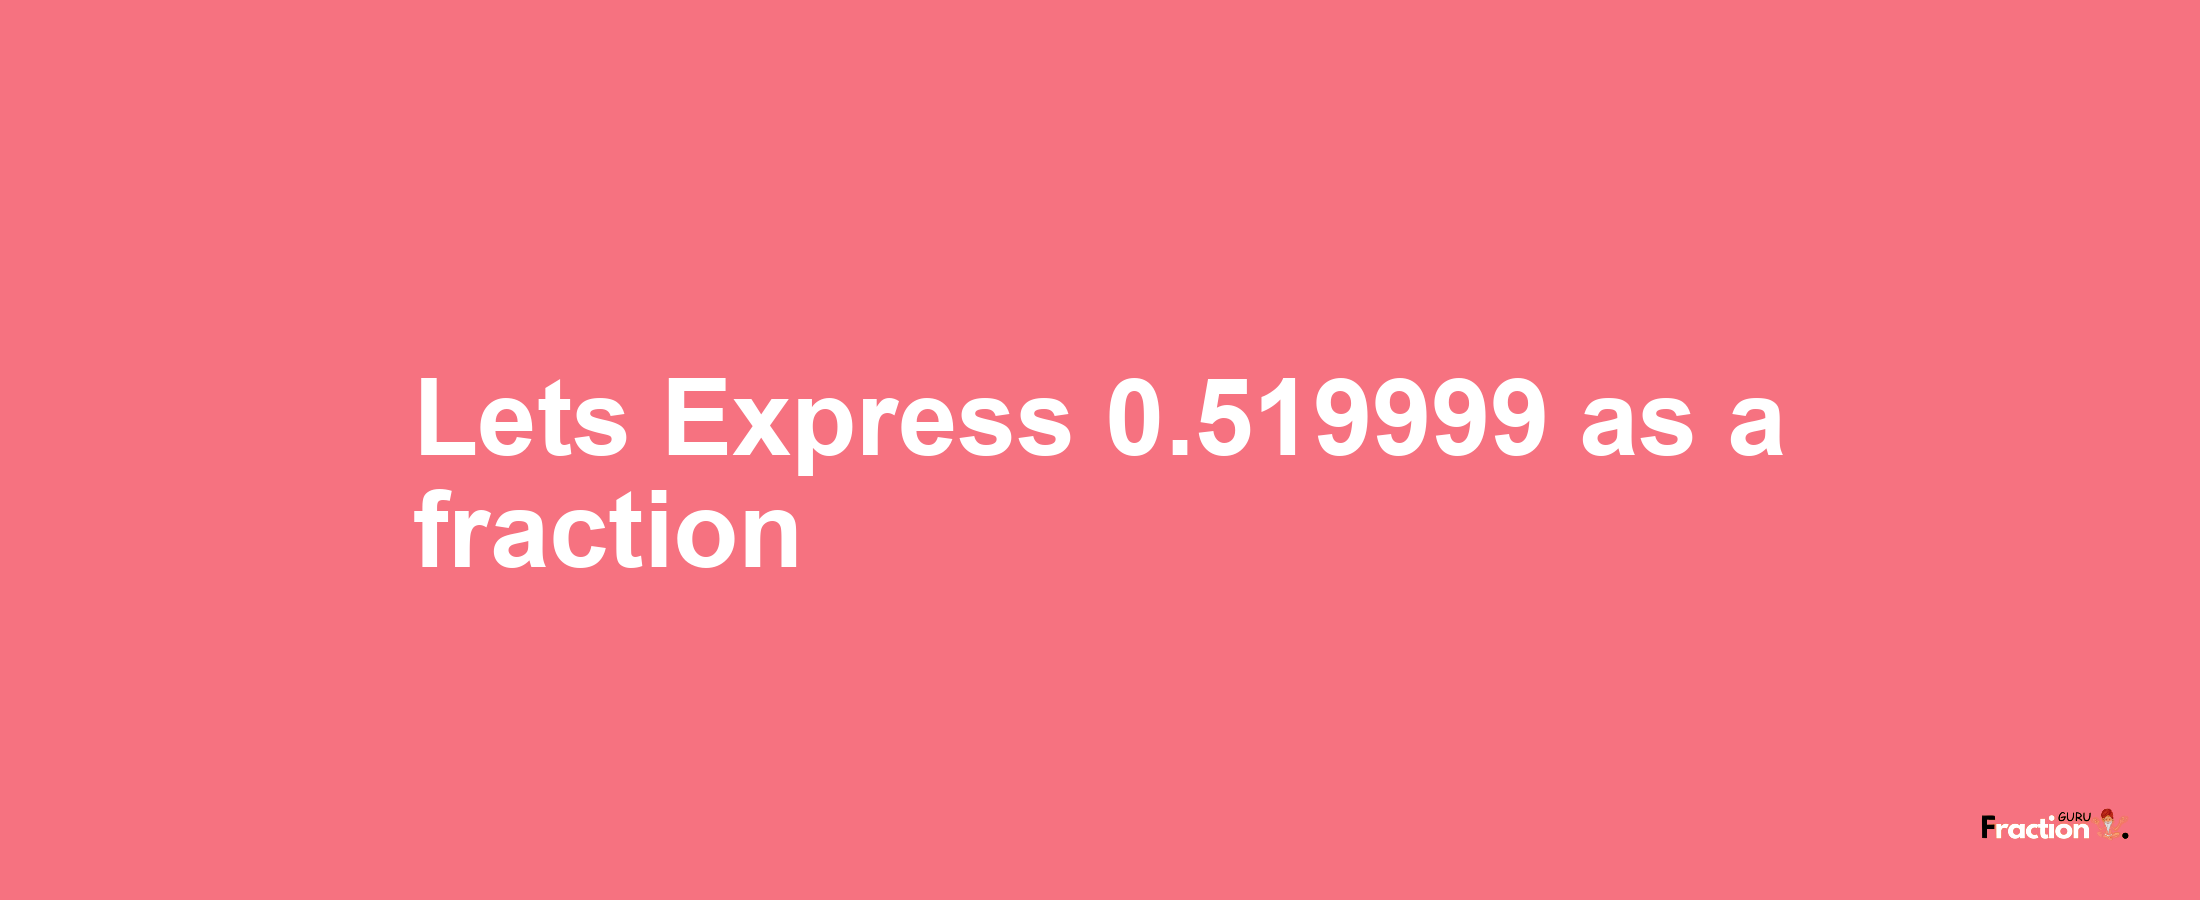 Lets Express 0.519999 as afraction